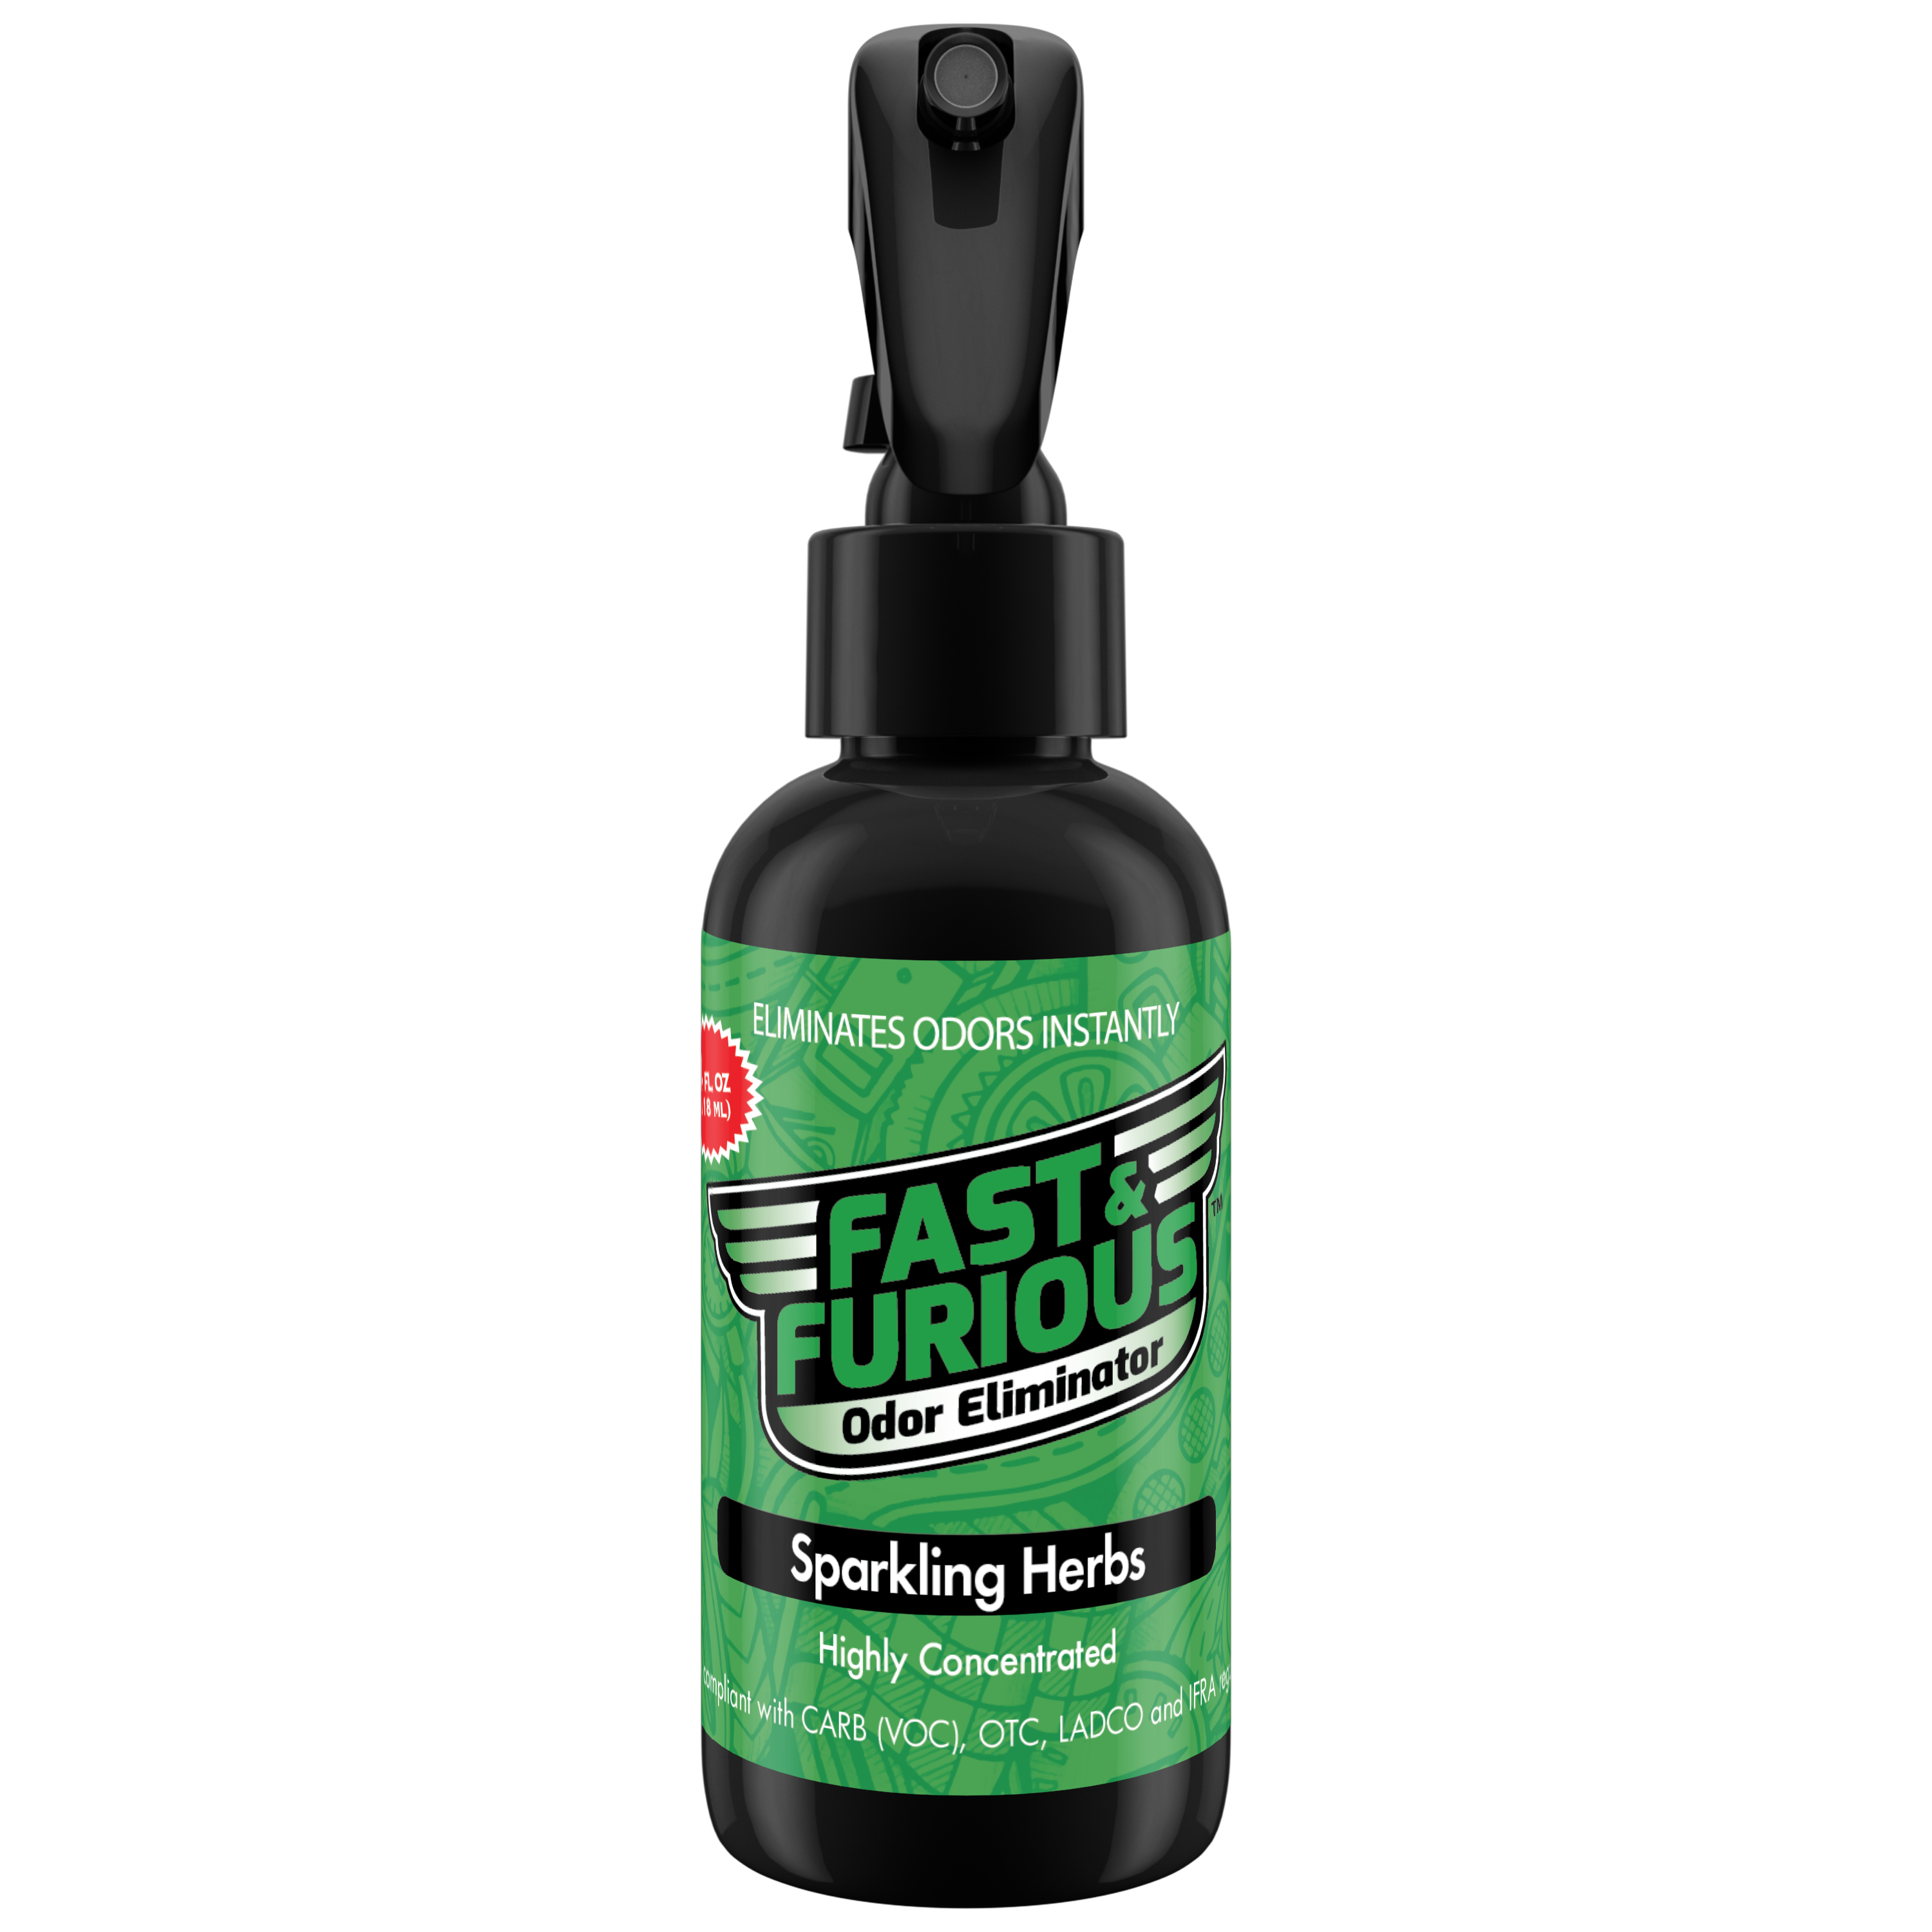 Fast and Furious Odor Eliminator - Sparkling Herbs Scent